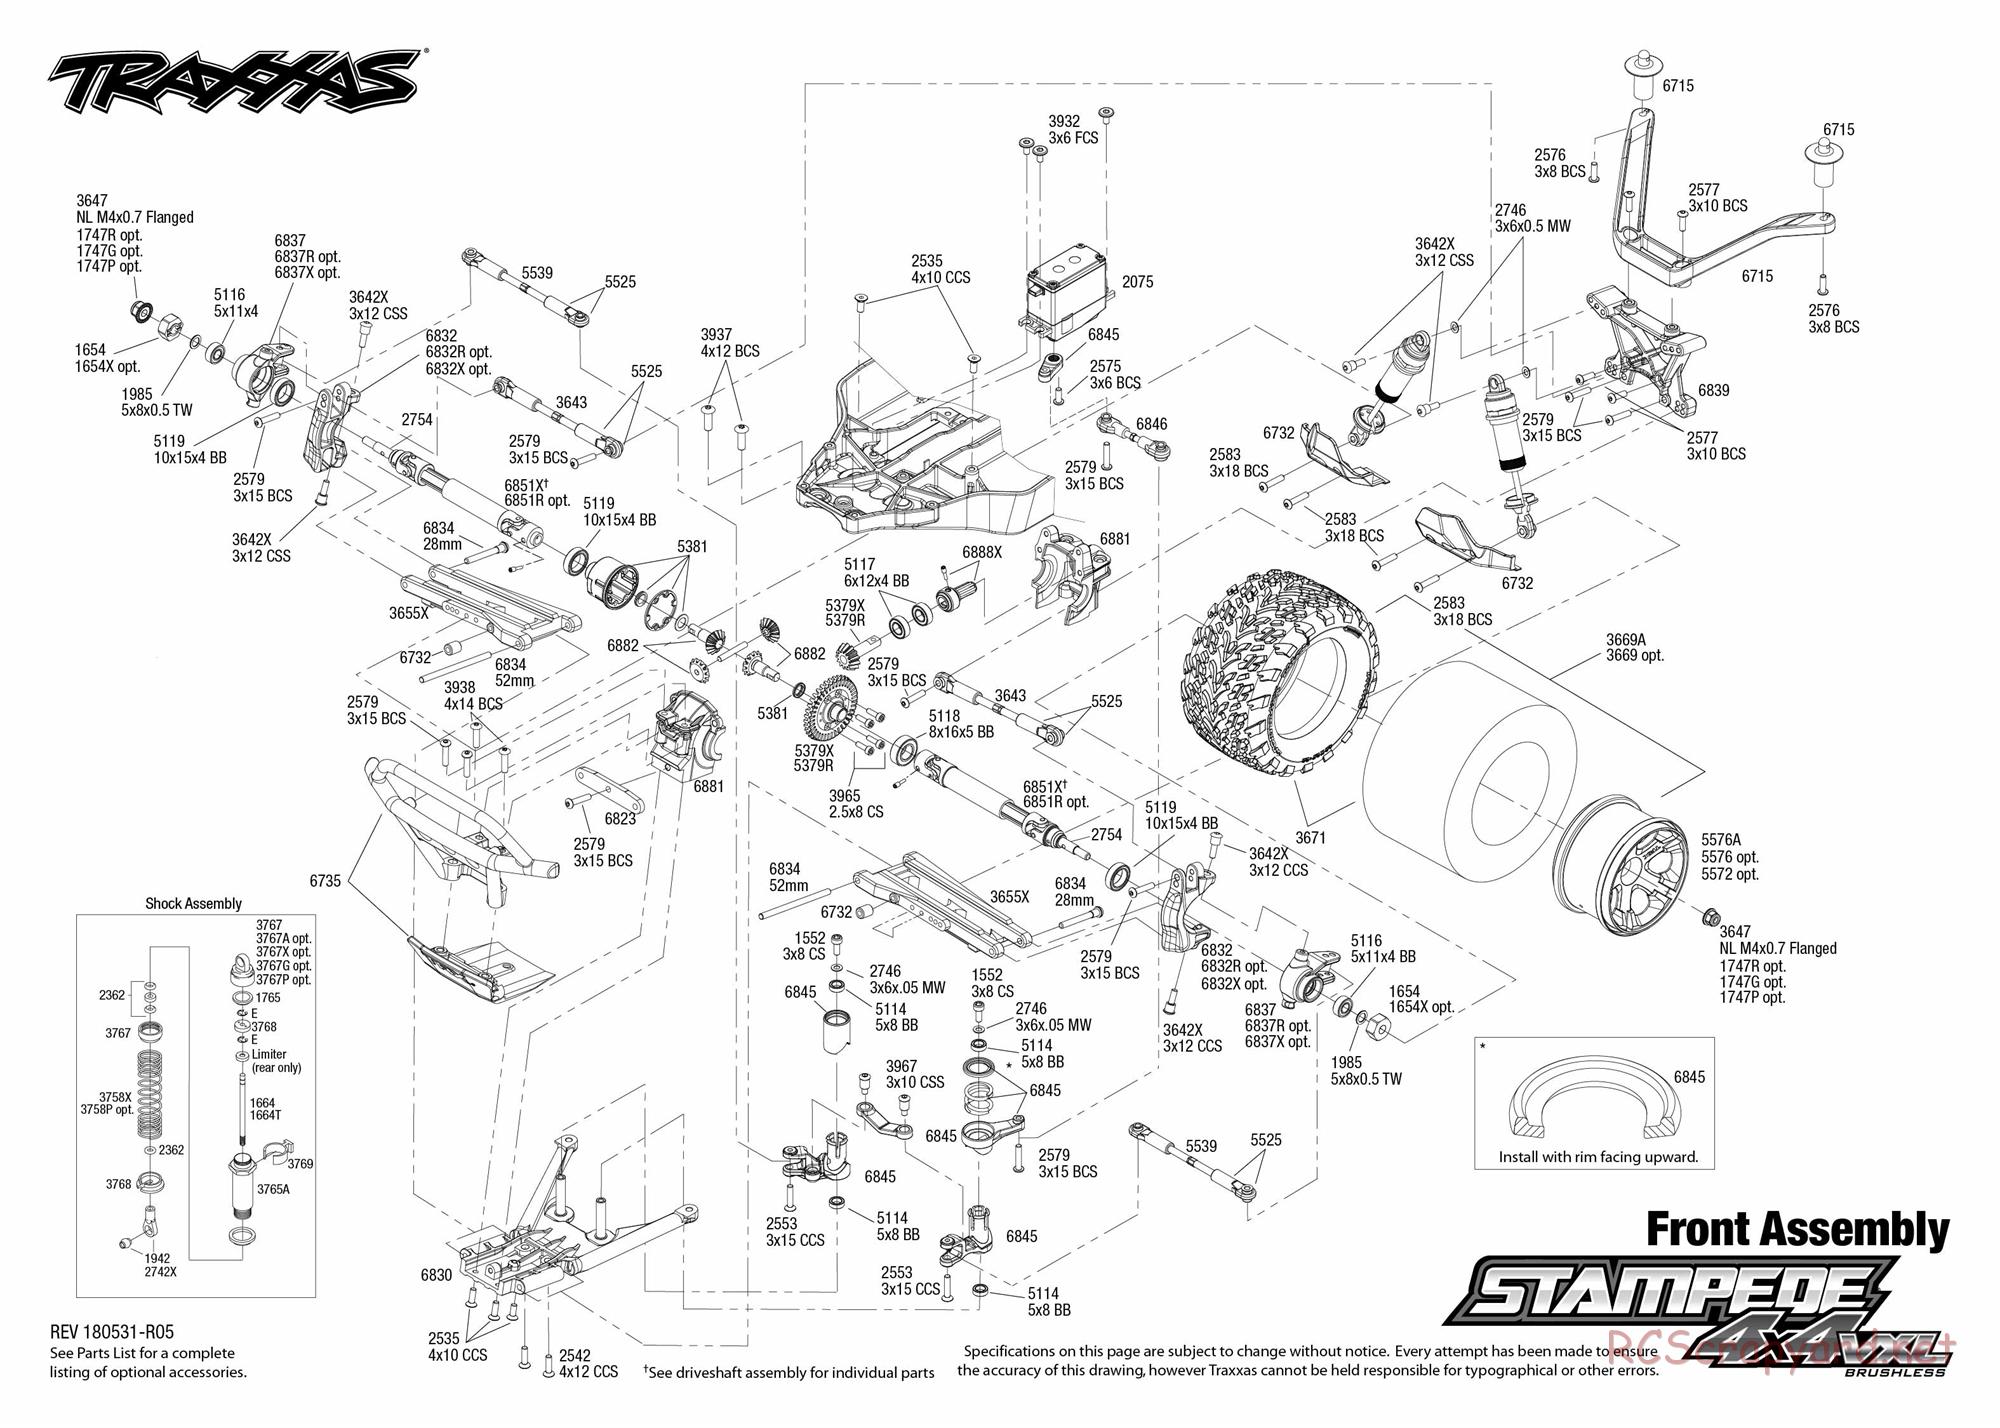 Traxxas - Stampede 4x4 VXL TSM (2015) - Exploded Views - Page 3